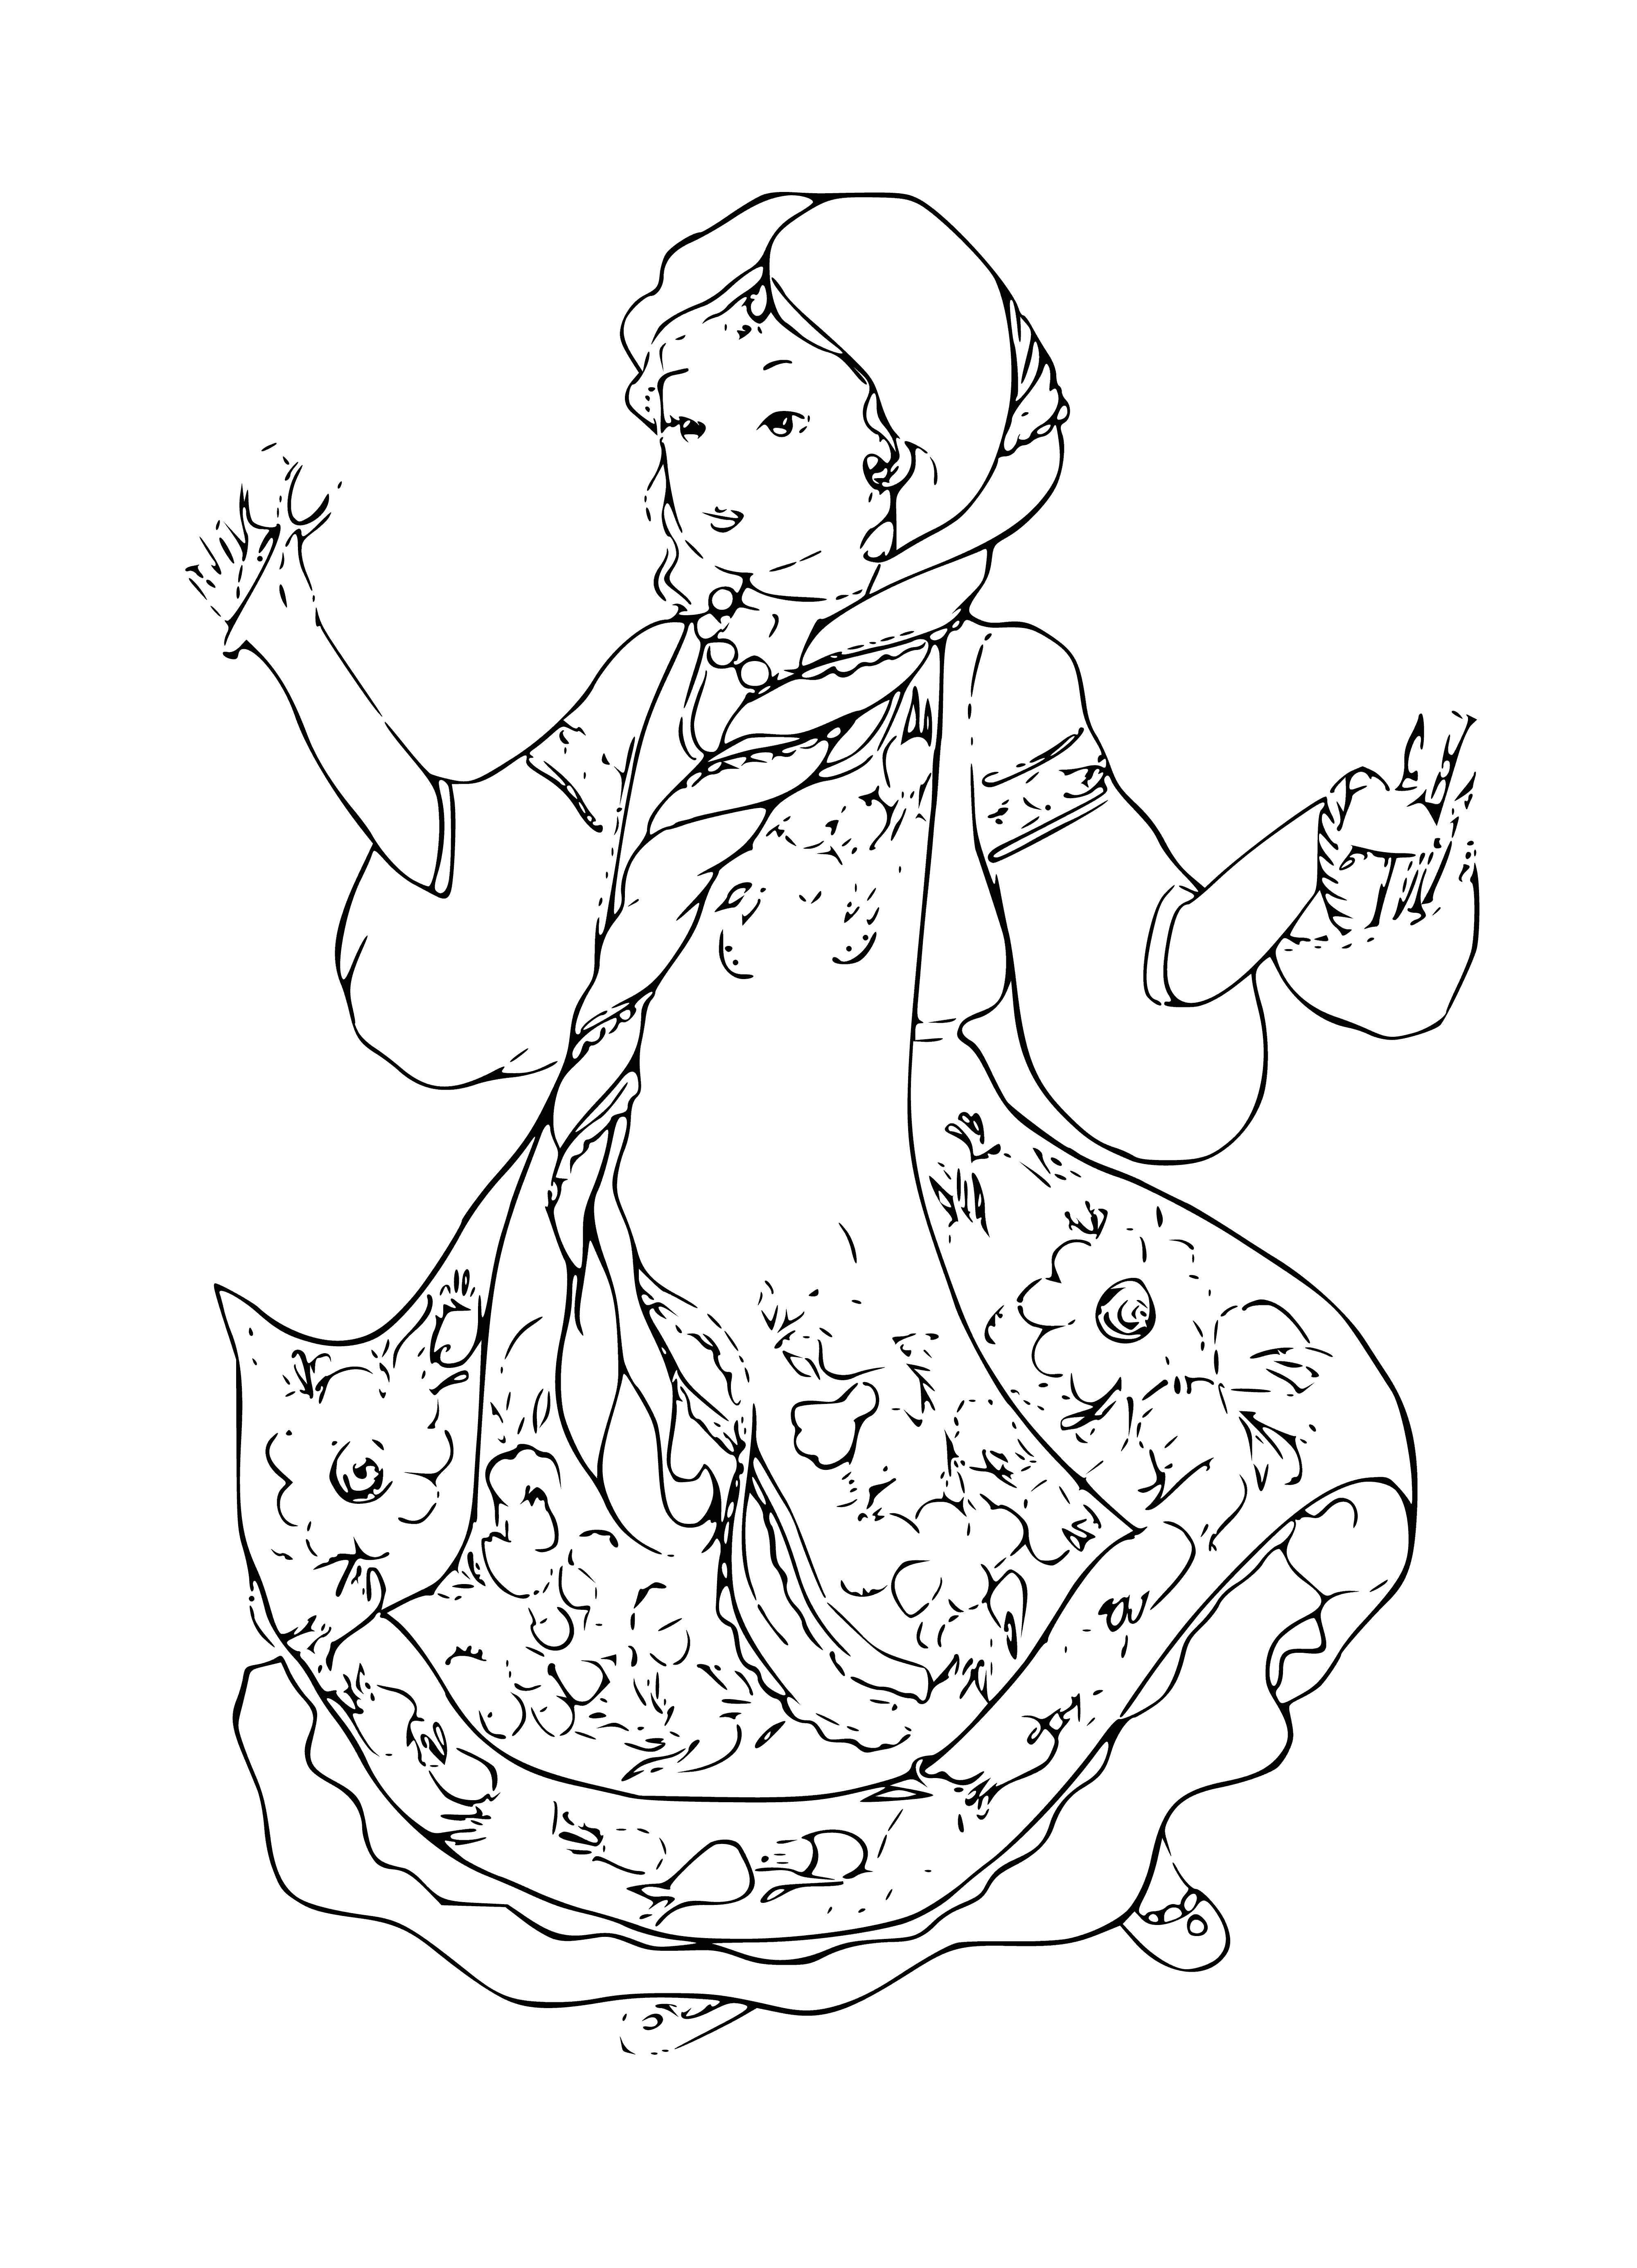 coloring page: Woman in dress stands in front of window, light shining thru, creating a glowing effect on the fitted bodice and flared skirt. #painting